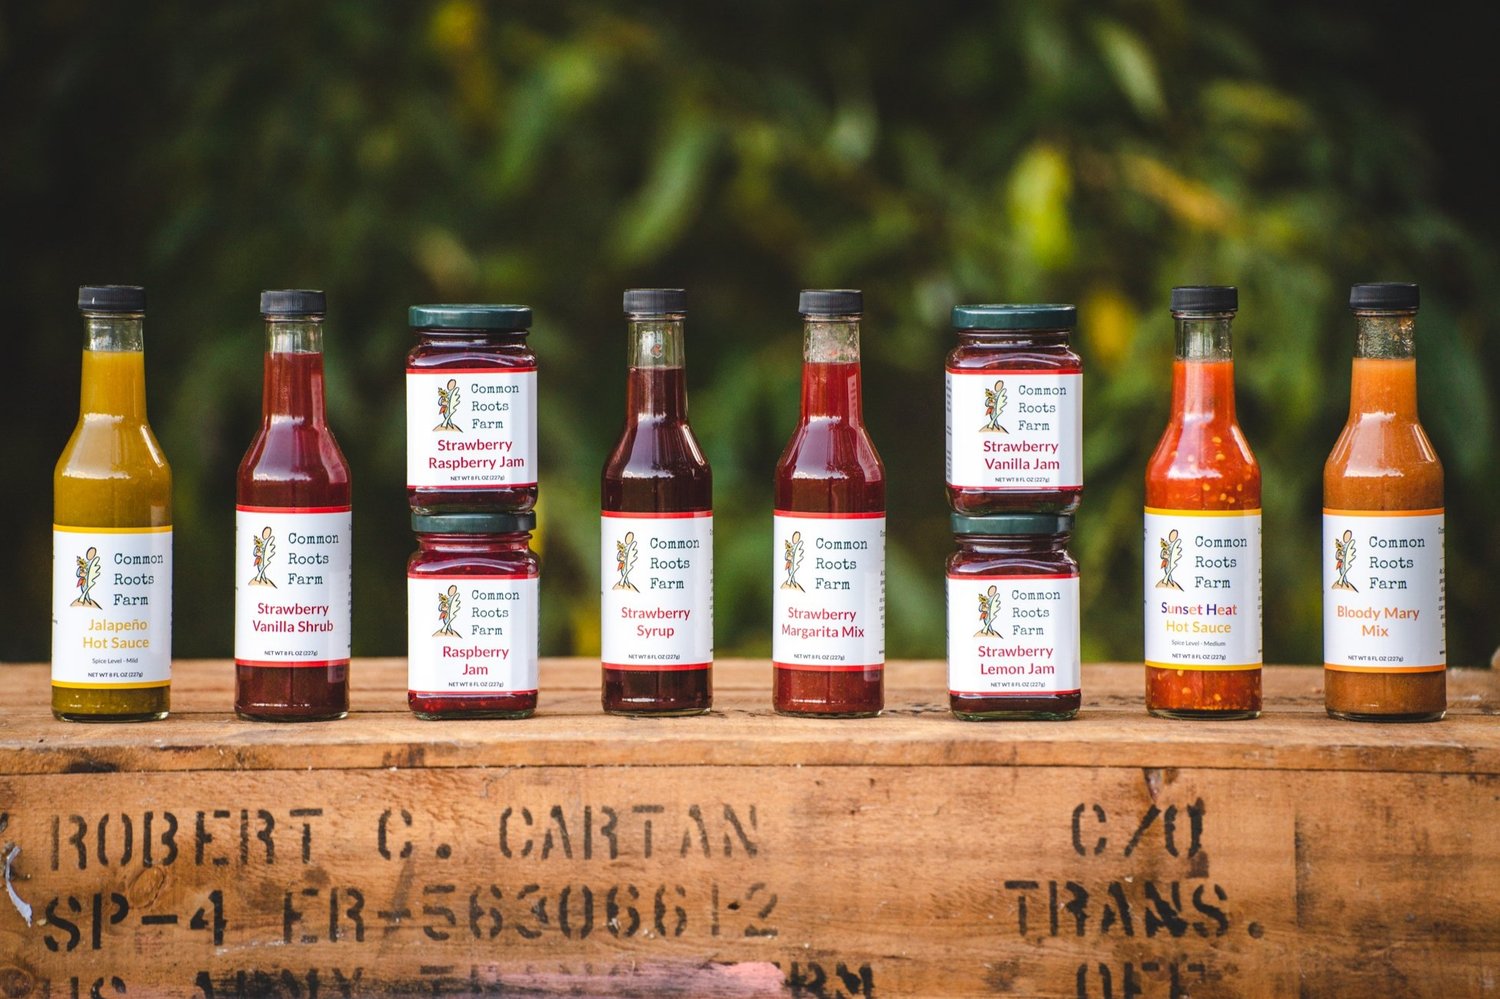 Common Roots Farm sauces, jams, syrups, and more